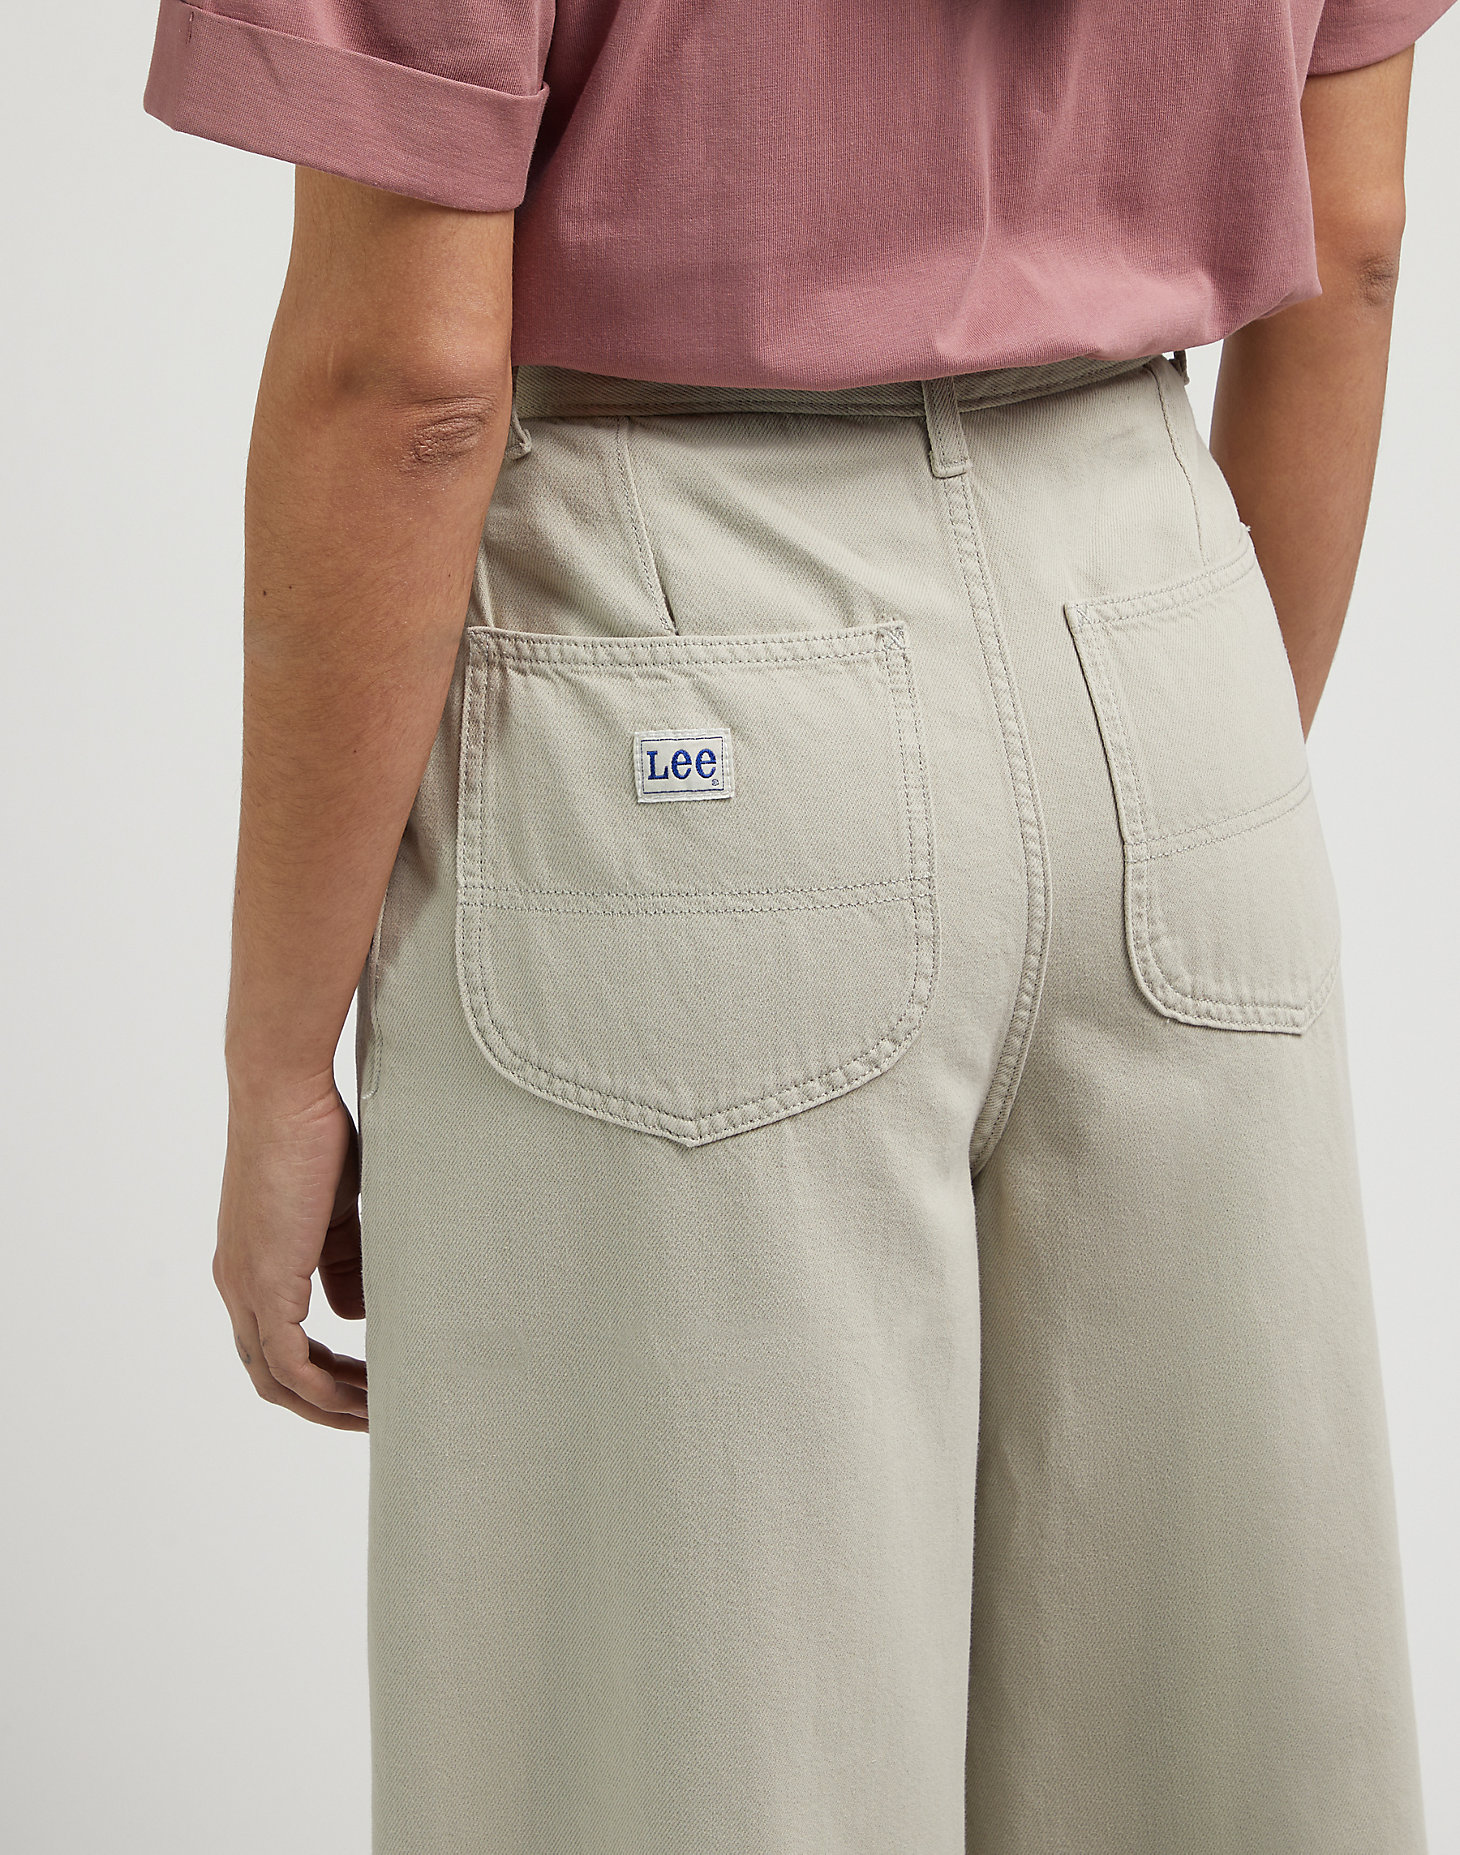 Relaxed Chino in Salina Stone alternative view 4